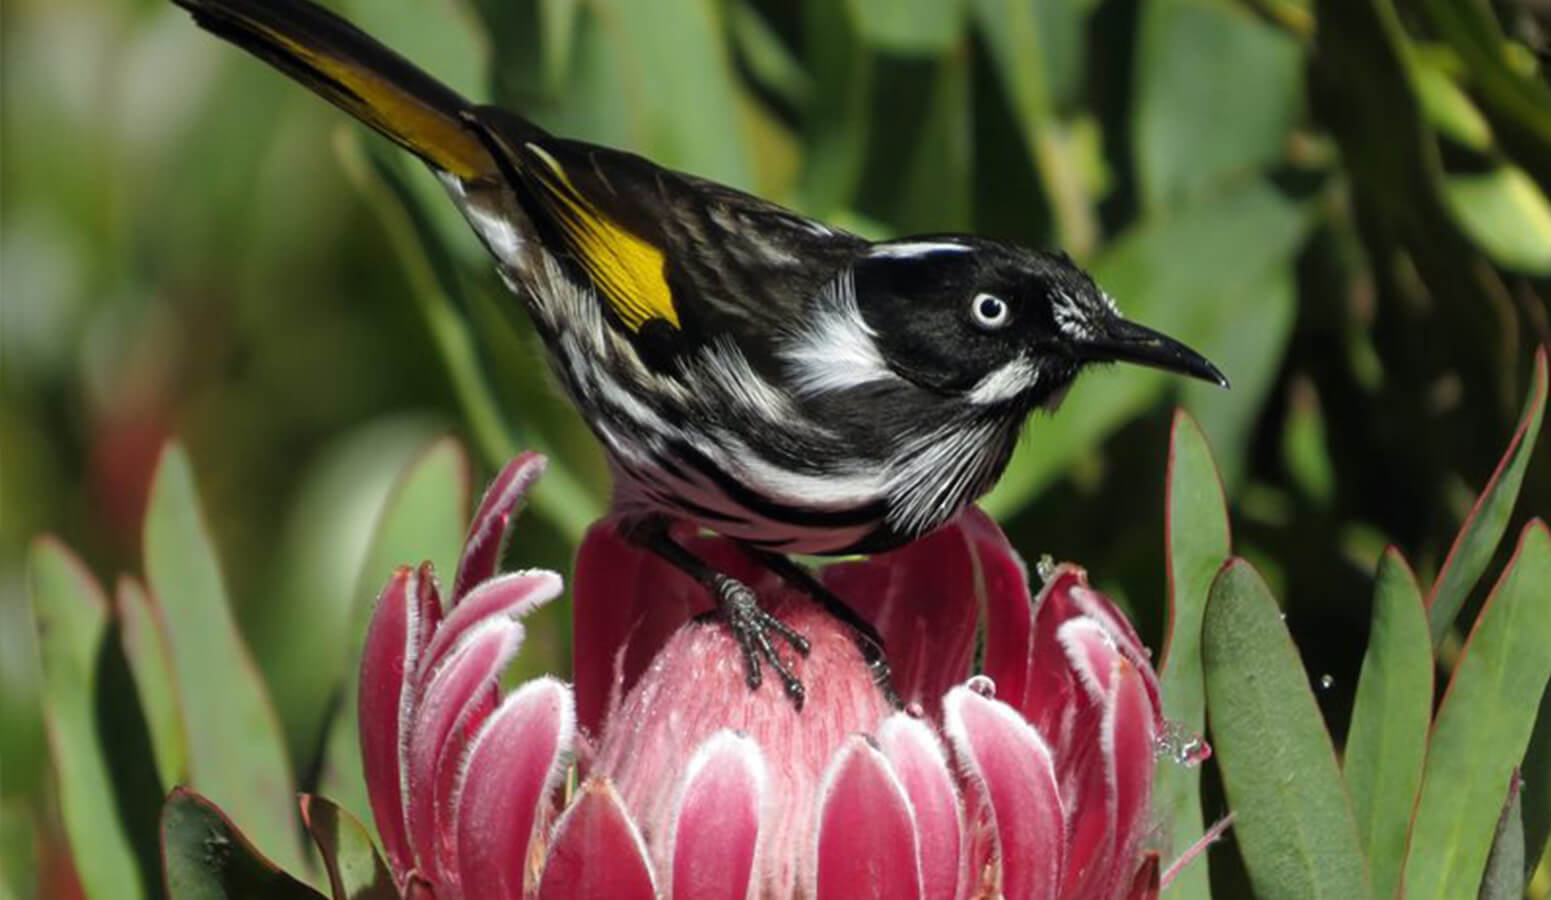 A New Holland honeyeater on protea at the Blue Mountains Botanic Garden Mount Tomah. Photo by Carol Probets.